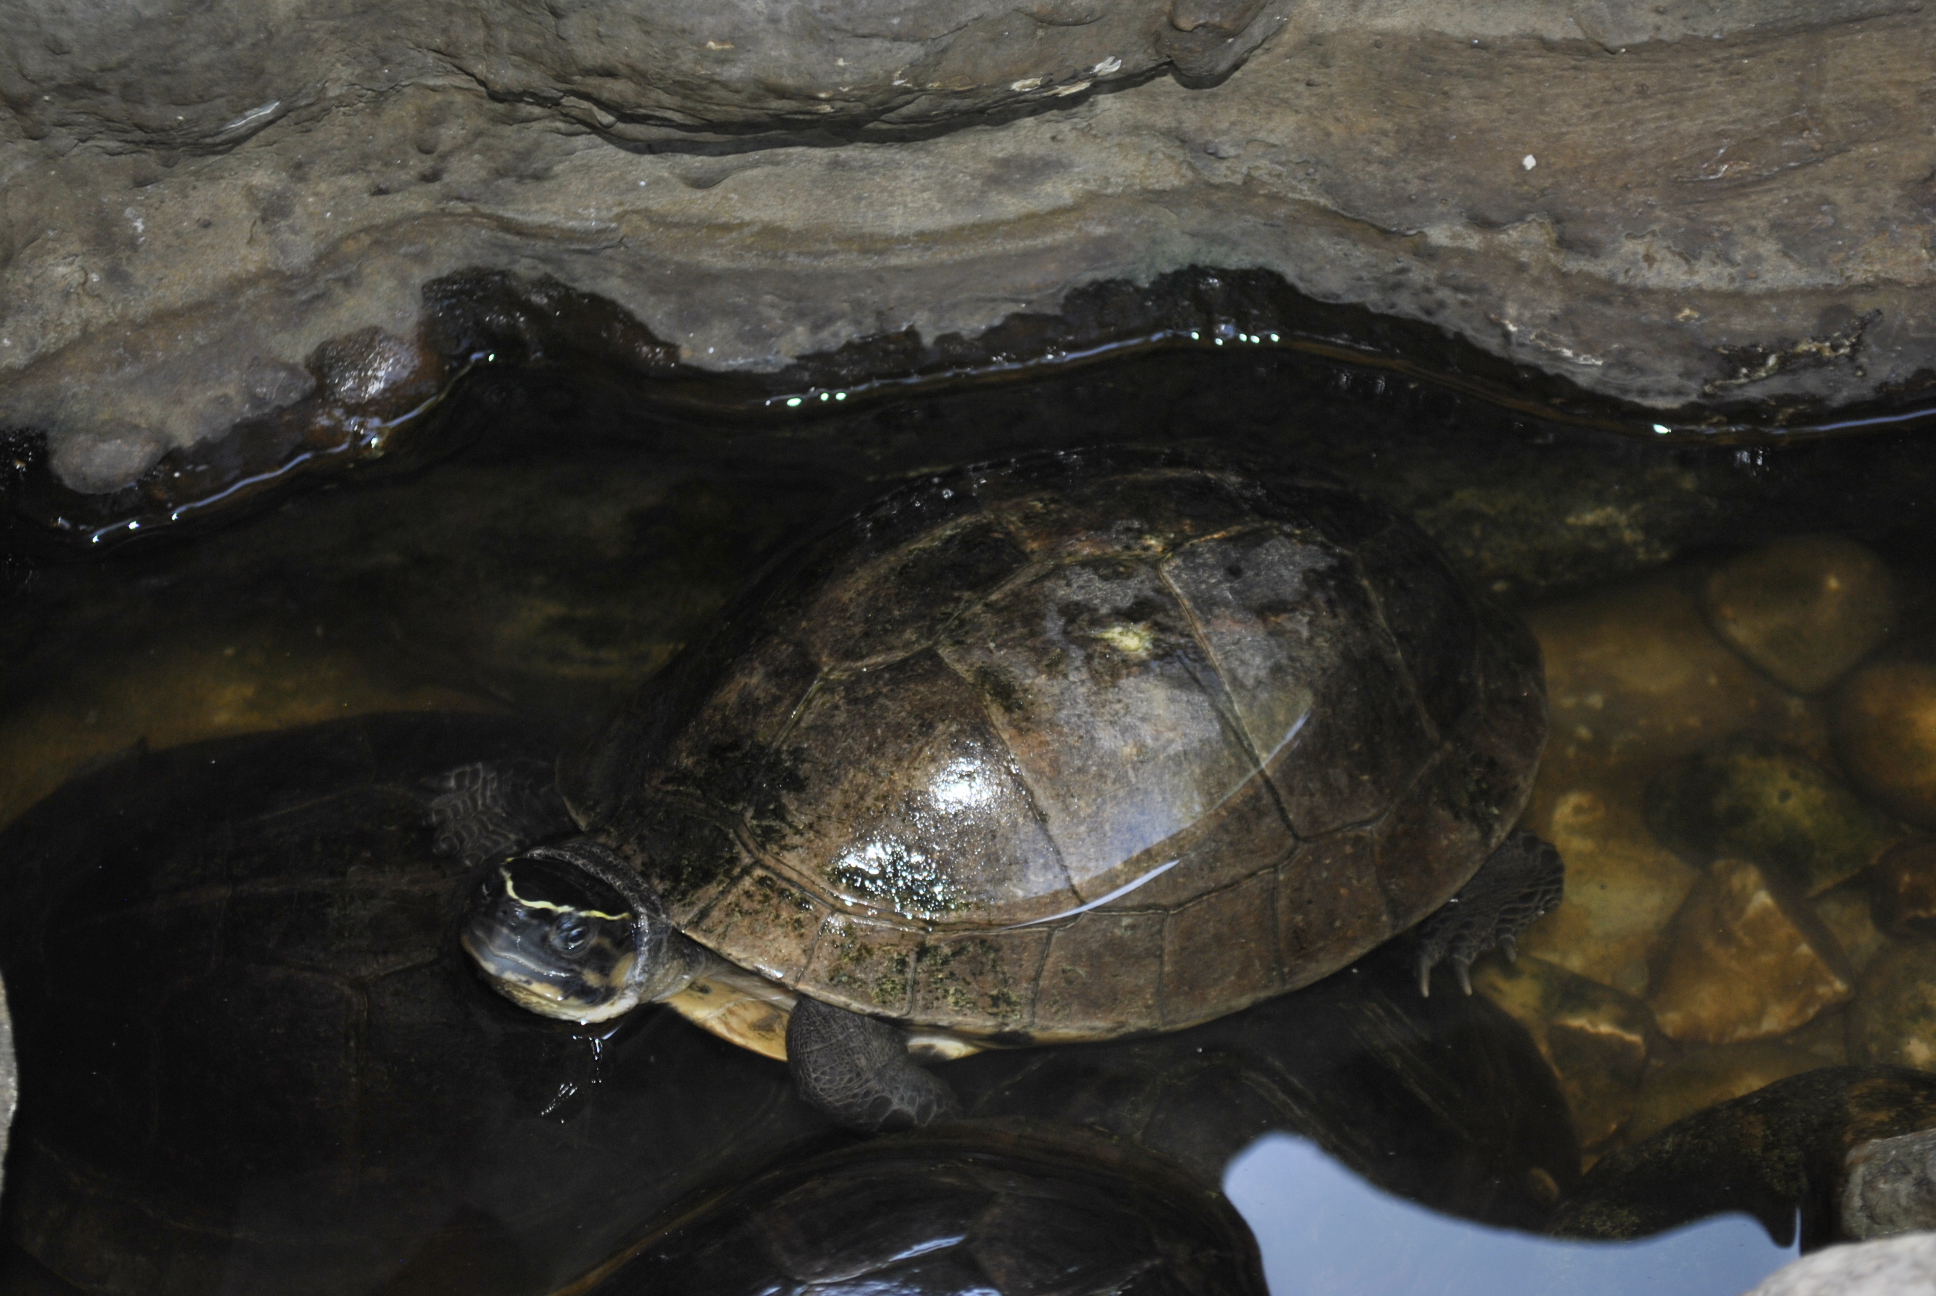 Turtle on the Pond, Animal, Pond, Reptile, Shell, HQ Photo